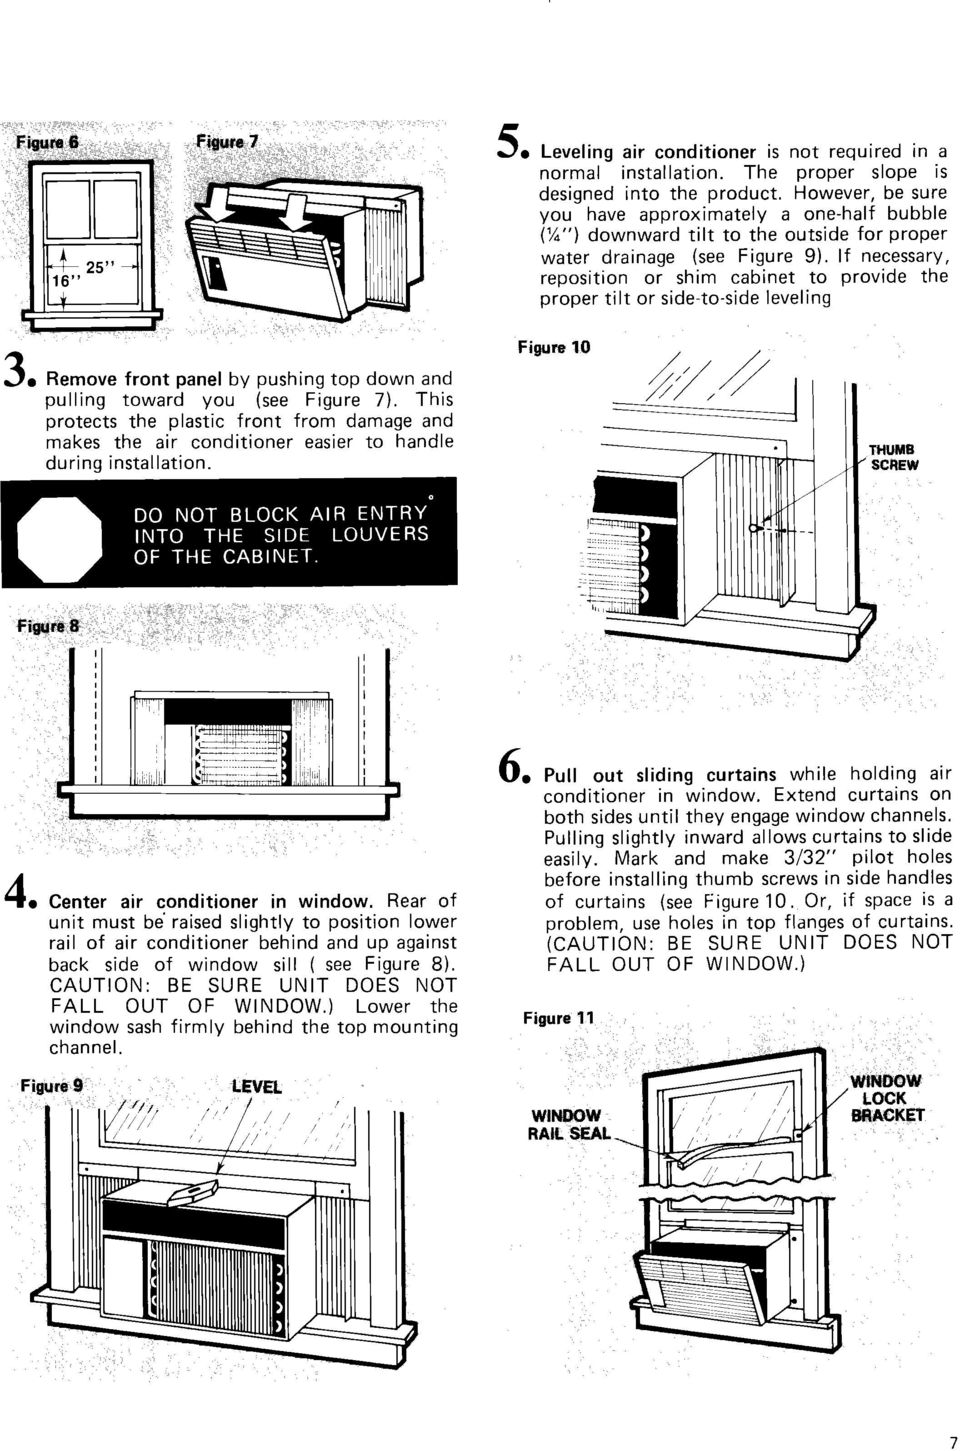 If necessary, reposition or shim cabinet to provide the proper tilt or side-to-side leveling 3. Remove front panel by pushing top down and pulling toward you (see Figure 7).